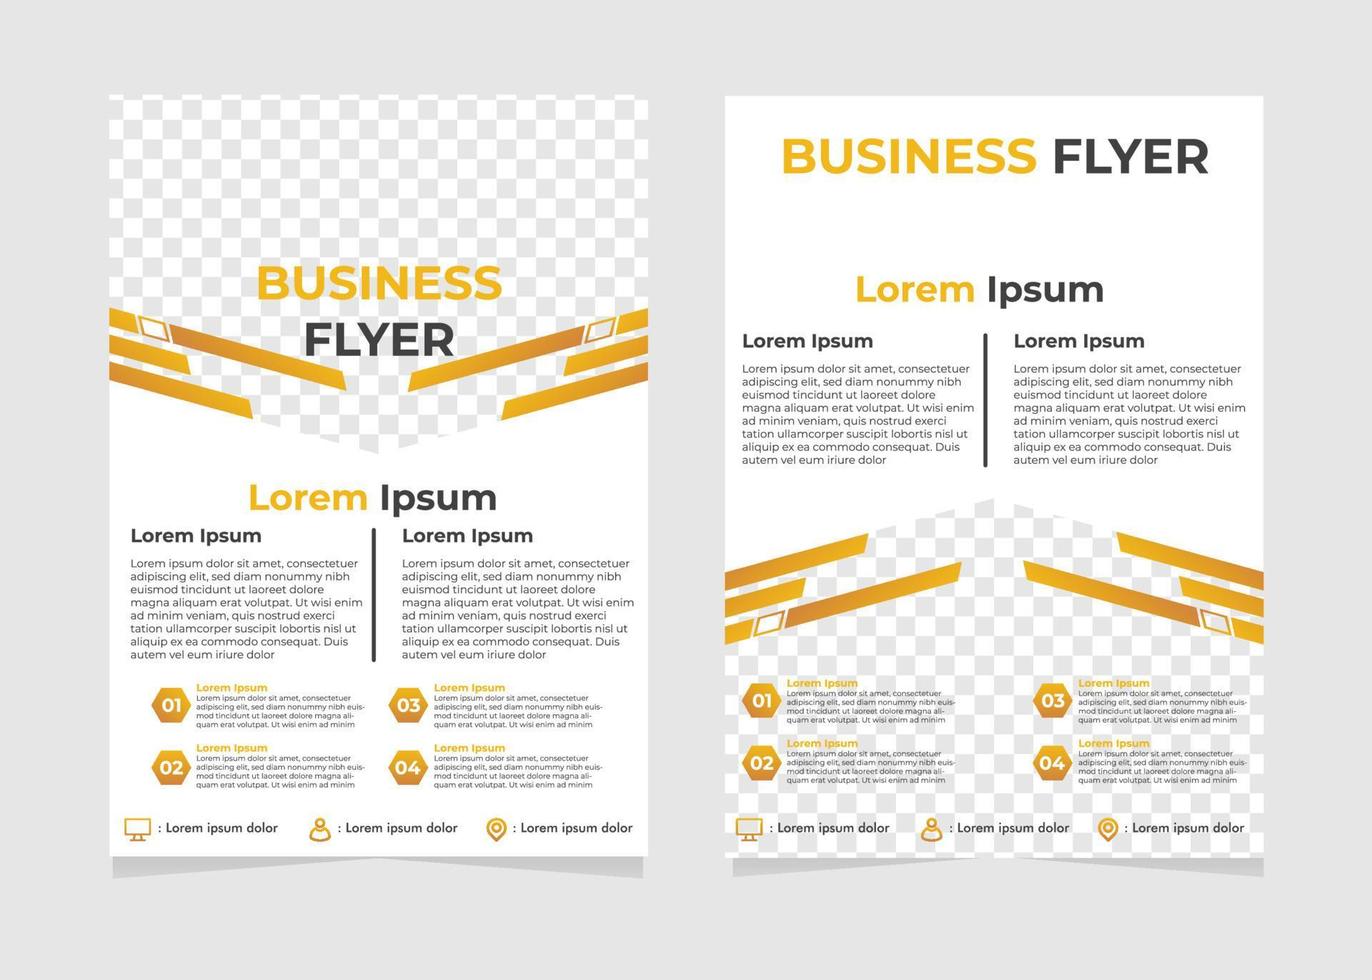 business flyer template with abstract geometric shapes. vector